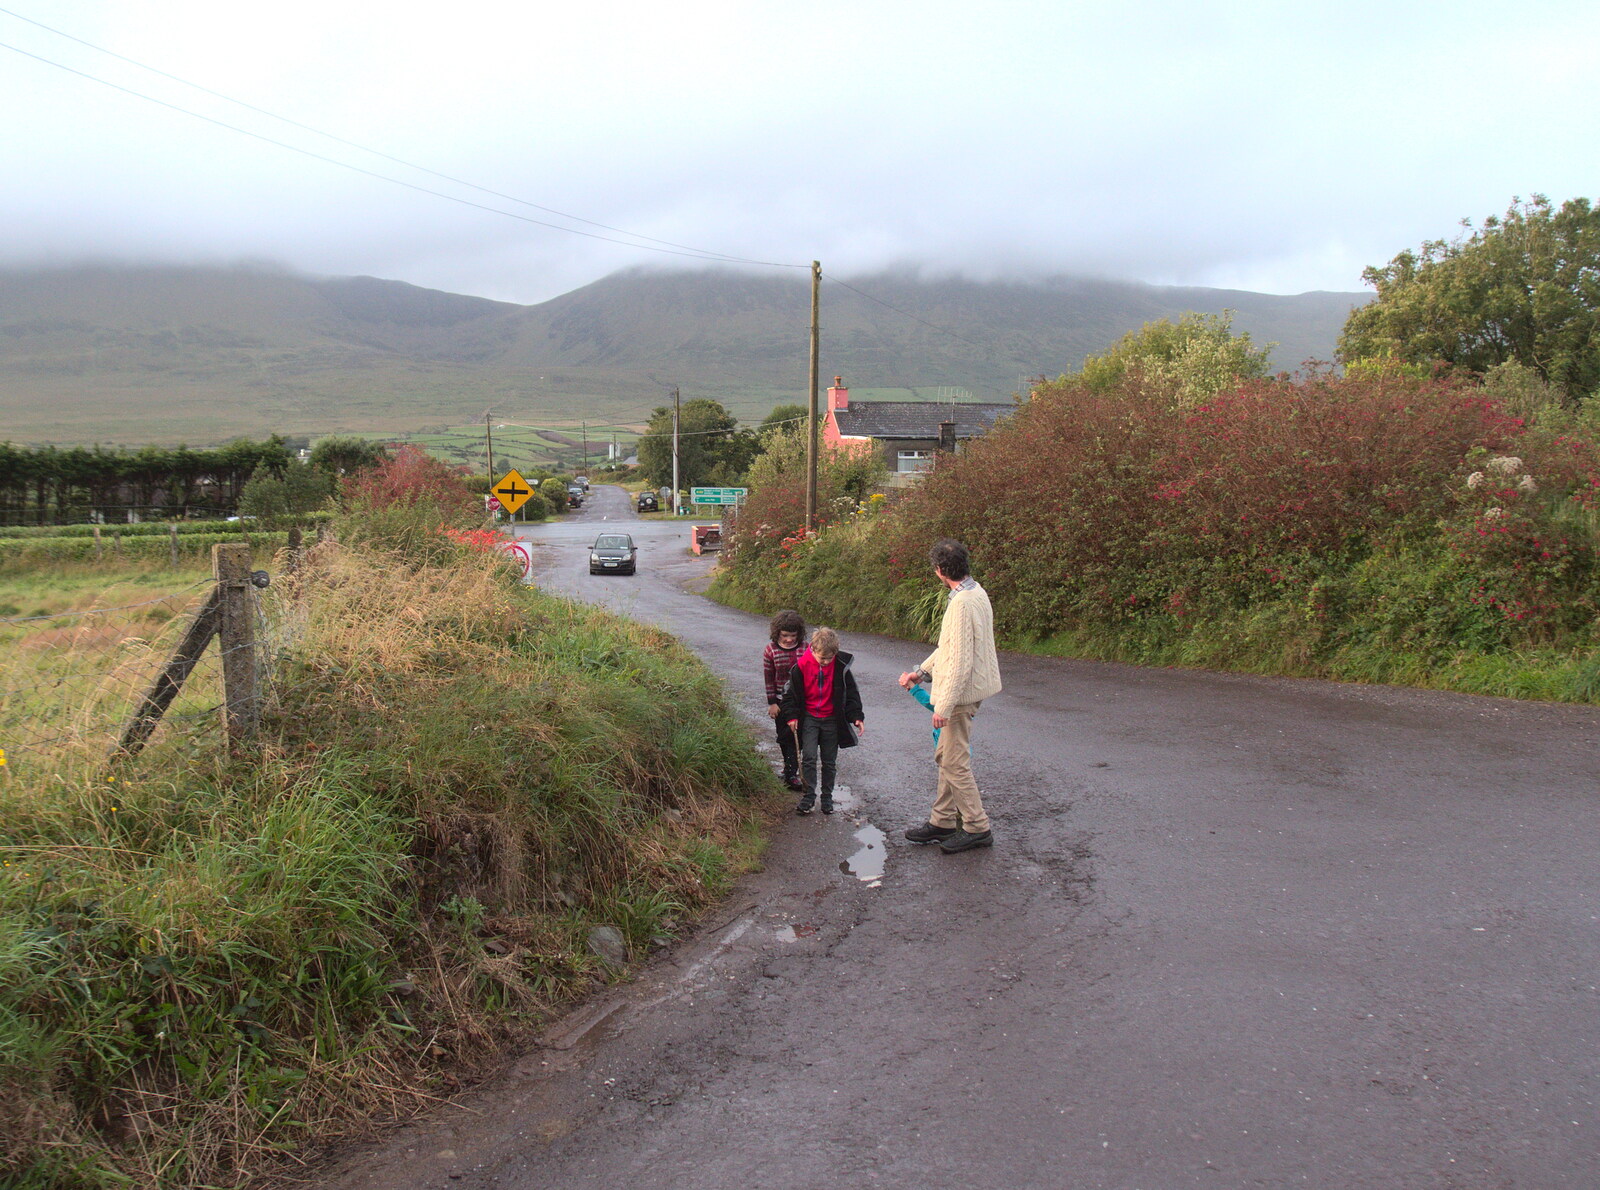 Walking up the road from Kate's Cross from Minard Beach and Ceol Agus Craic, Lios Póil, Kerry - 6th August 2017